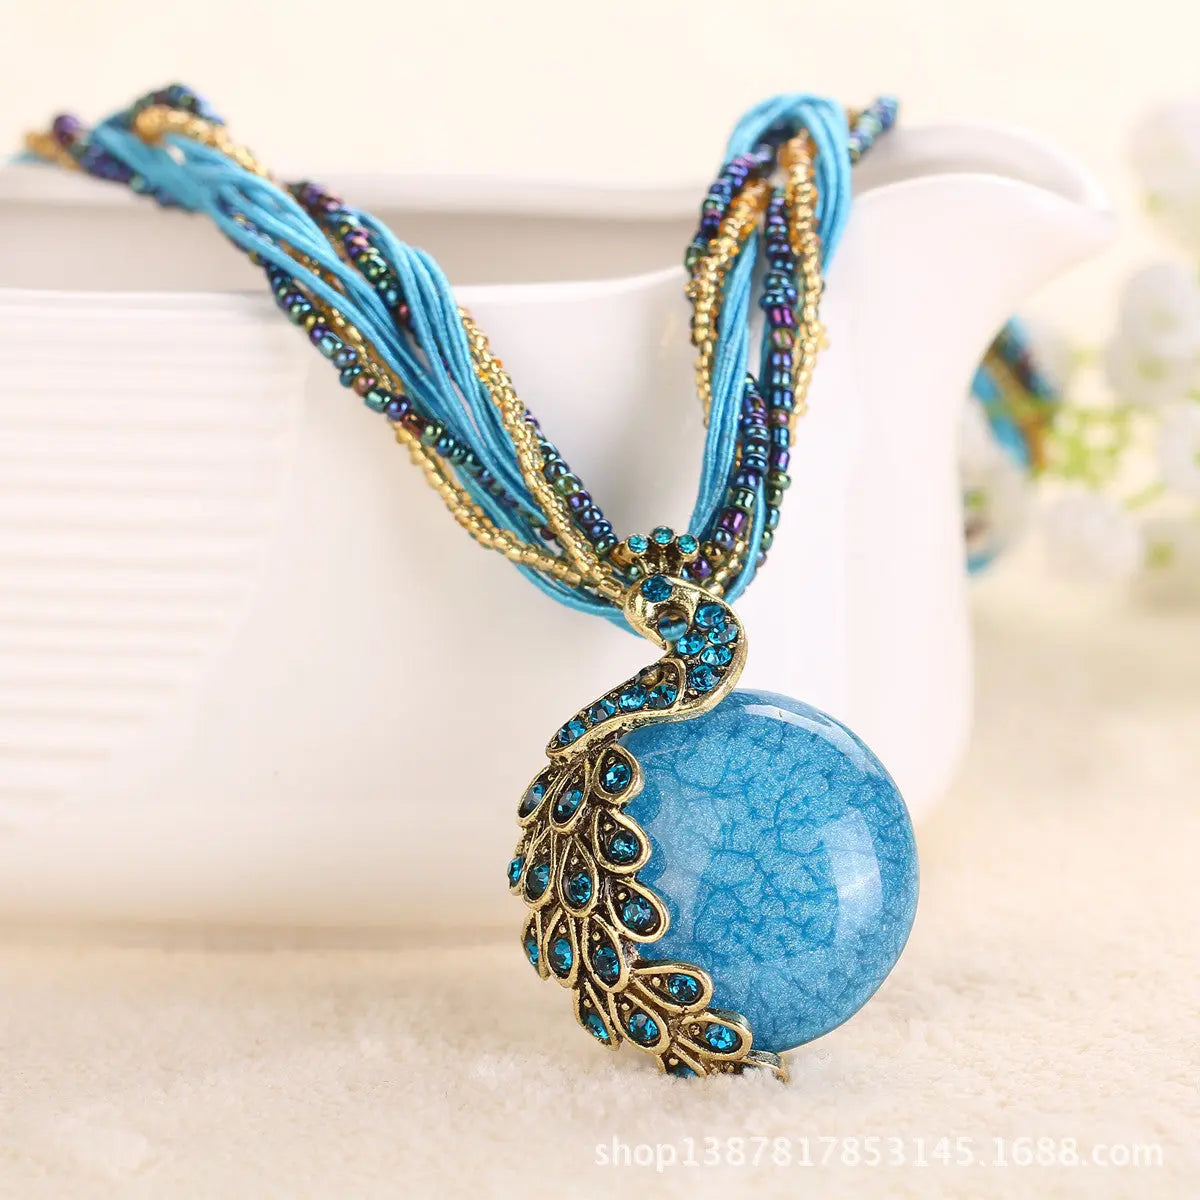 Boho Ethnic Jewelry Choker Handmade Pendant Necklace Natural Stone Bead Peacock Statement Maxi Necklace for Women Girls Gifts - Trending's Arena Beauty Boho Ethnic Jewelry Choker Handmade Pendant Necklace Natural Stone Bead Peacock Statement Maxi Necklace for Women Girls Gifts Electronics Facial & Neck blue